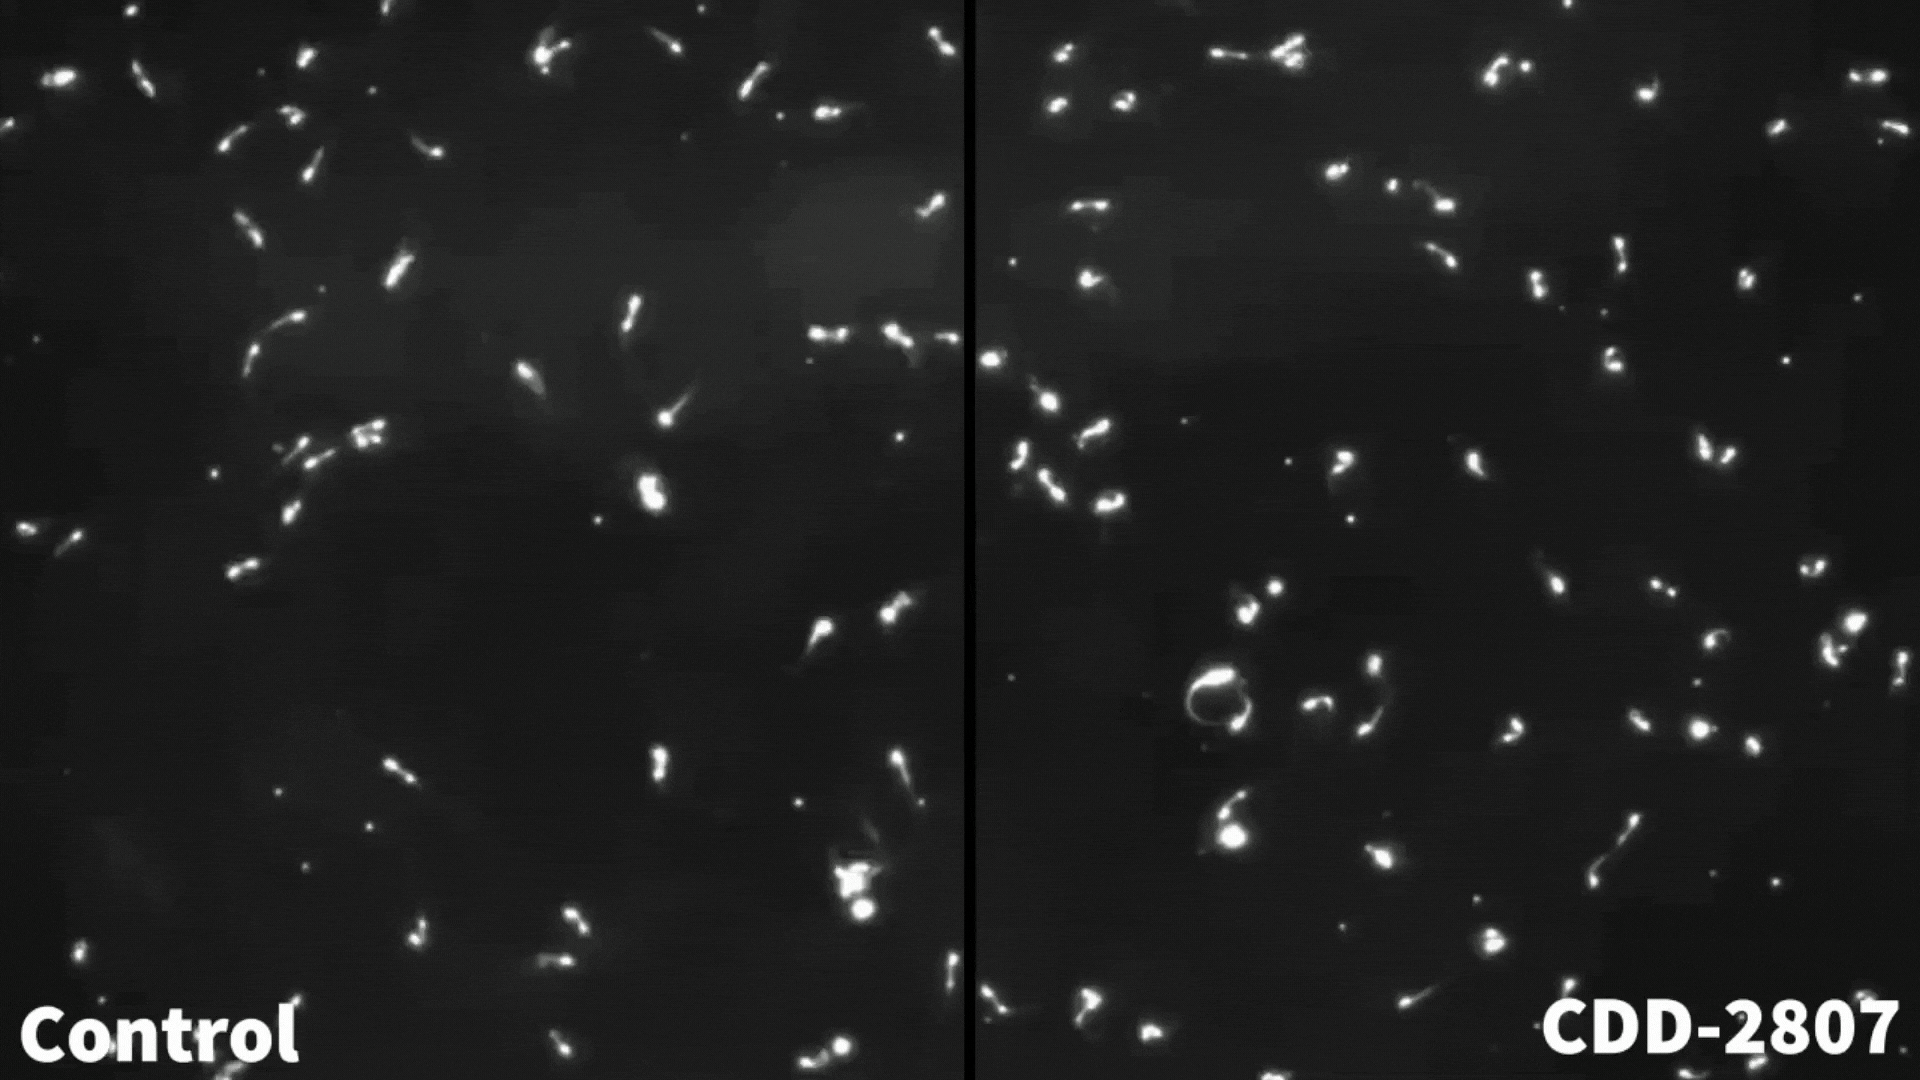 Microscopic image showing the compound CDD-2807 reduce sperm motility.